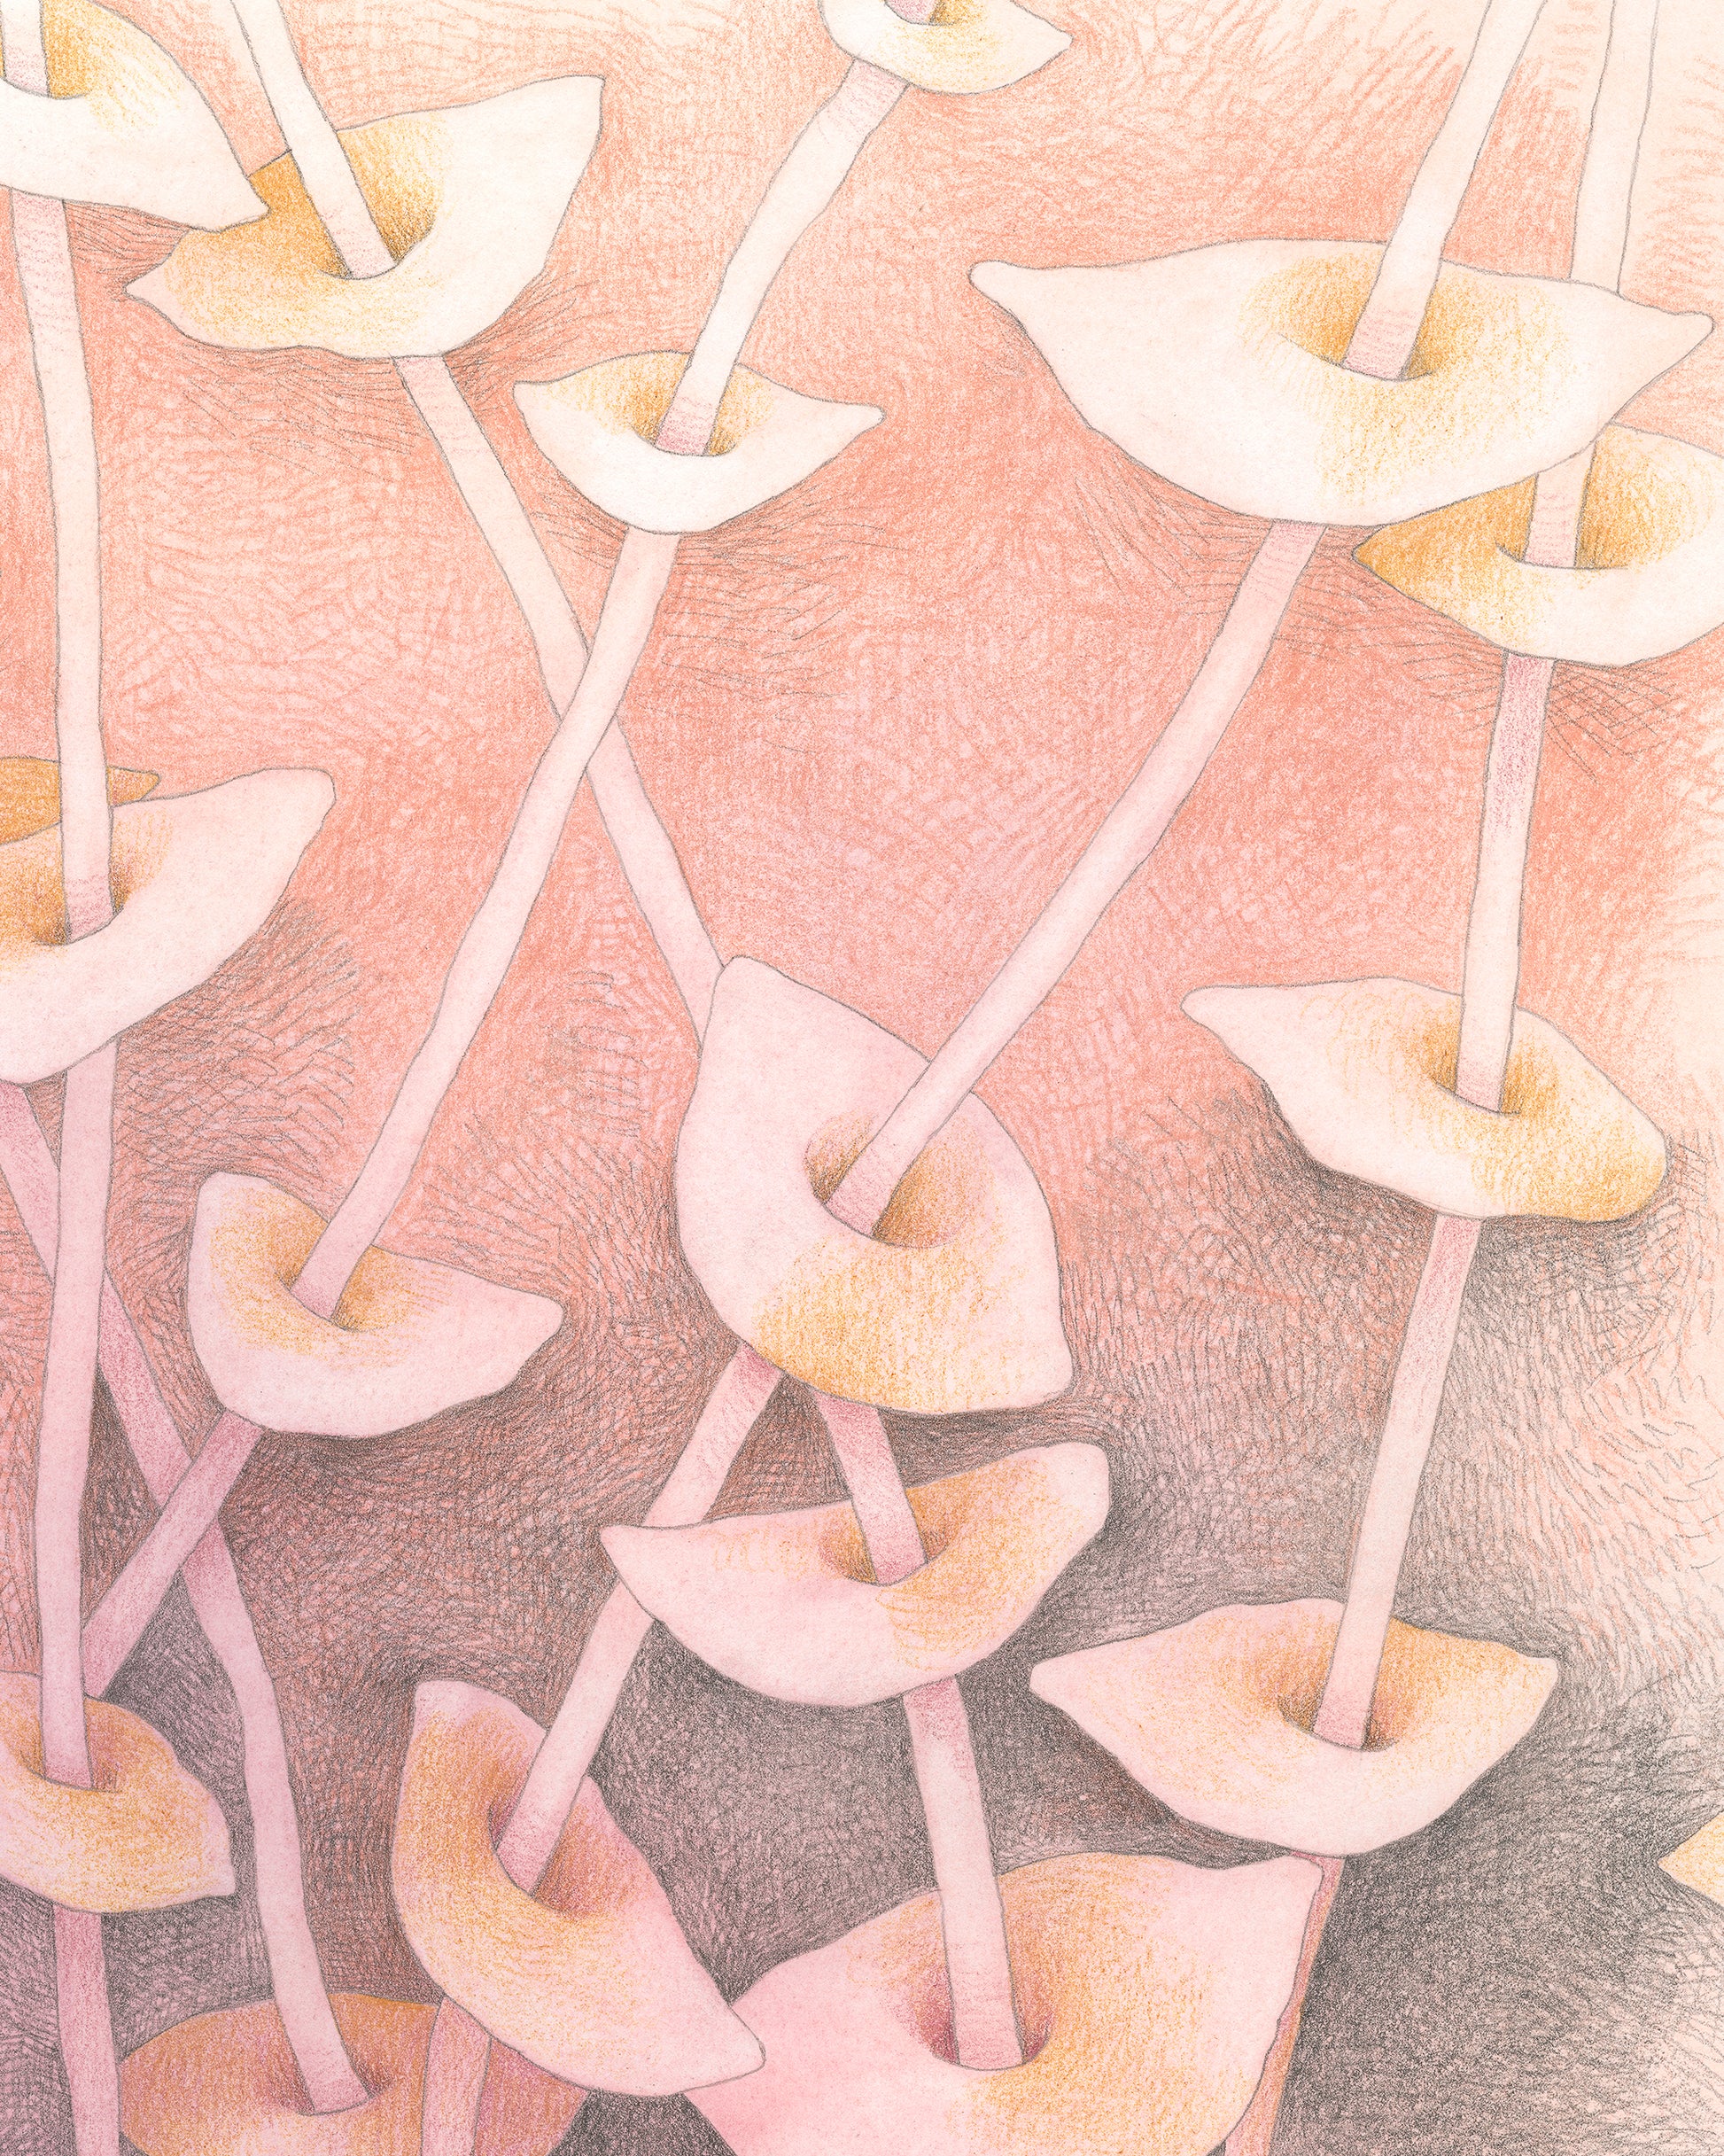 Semi-abstract colored pencil drawing of overlapping leaves on slender stems on peach background.